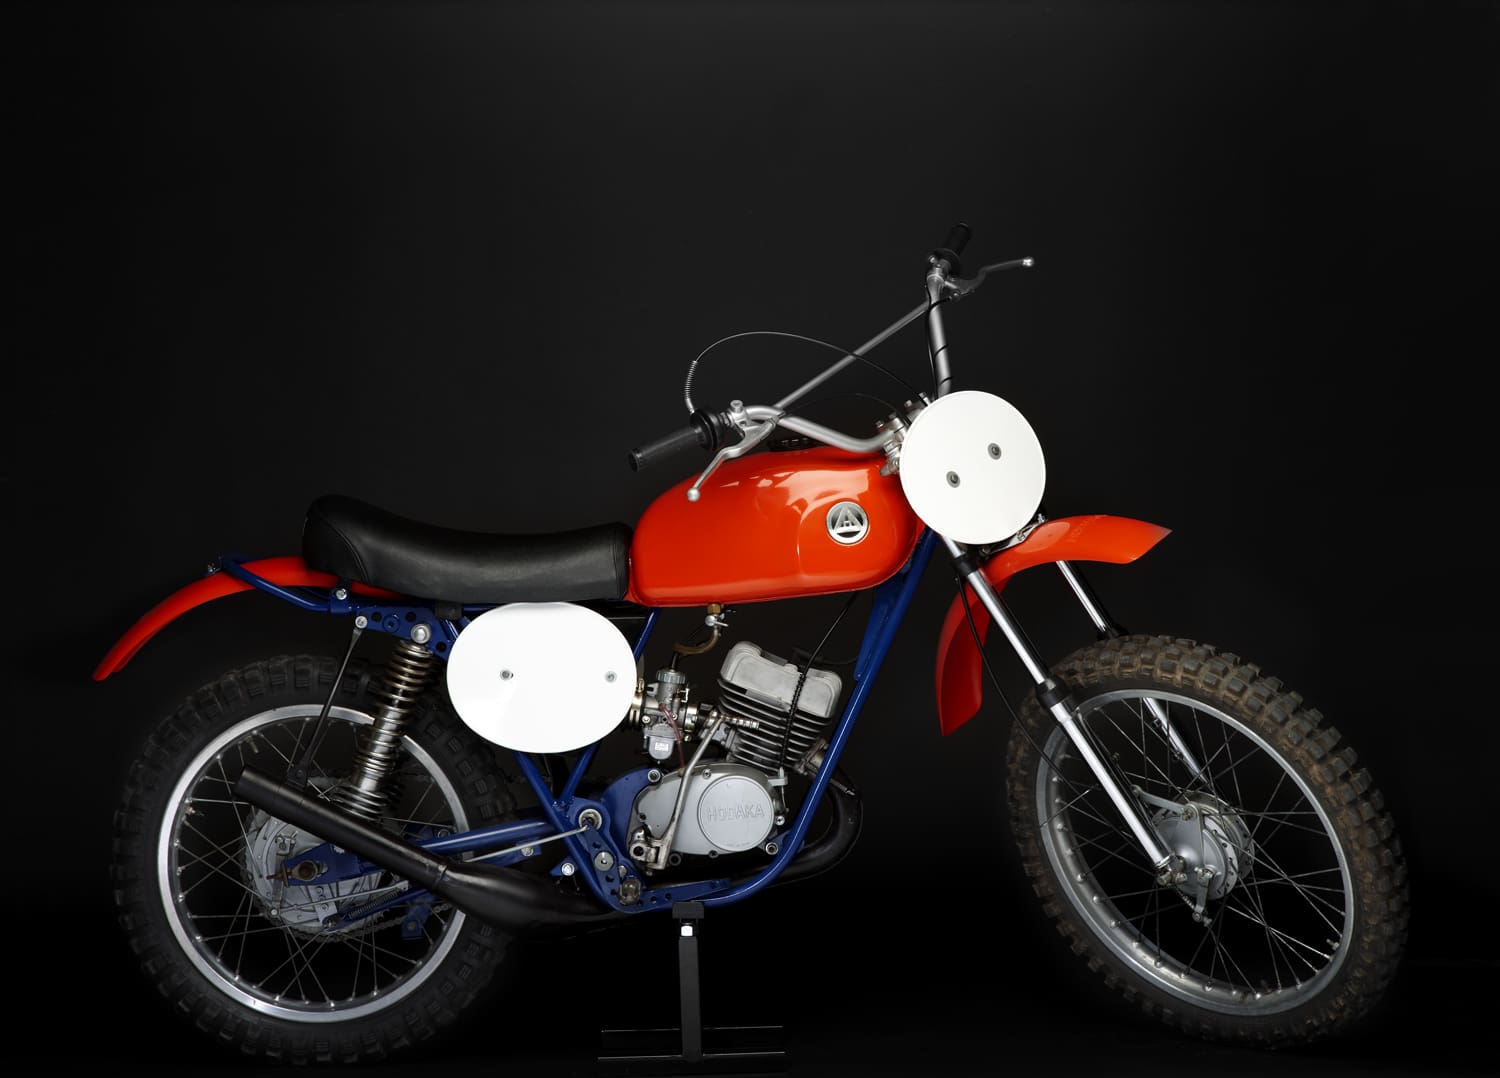 A red and blue dirt bike is on display against a black background.